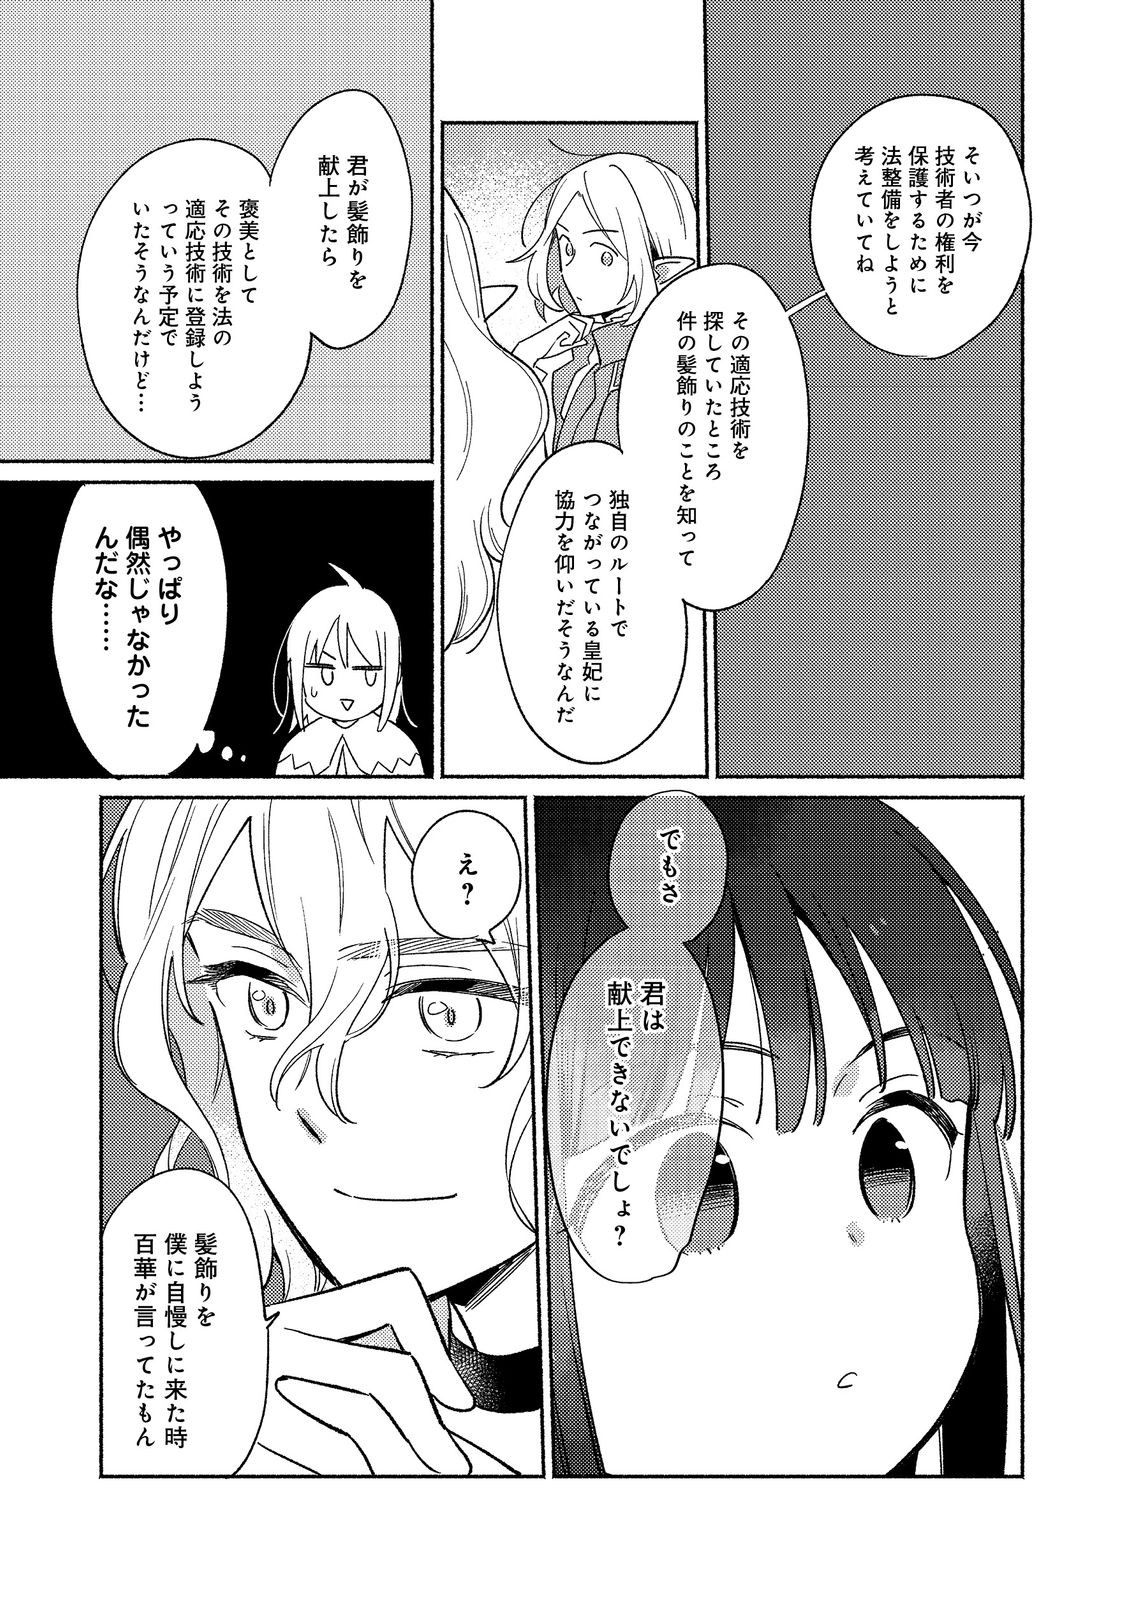 I’m the White Pig Nobleman 第19.2話 - Page 3